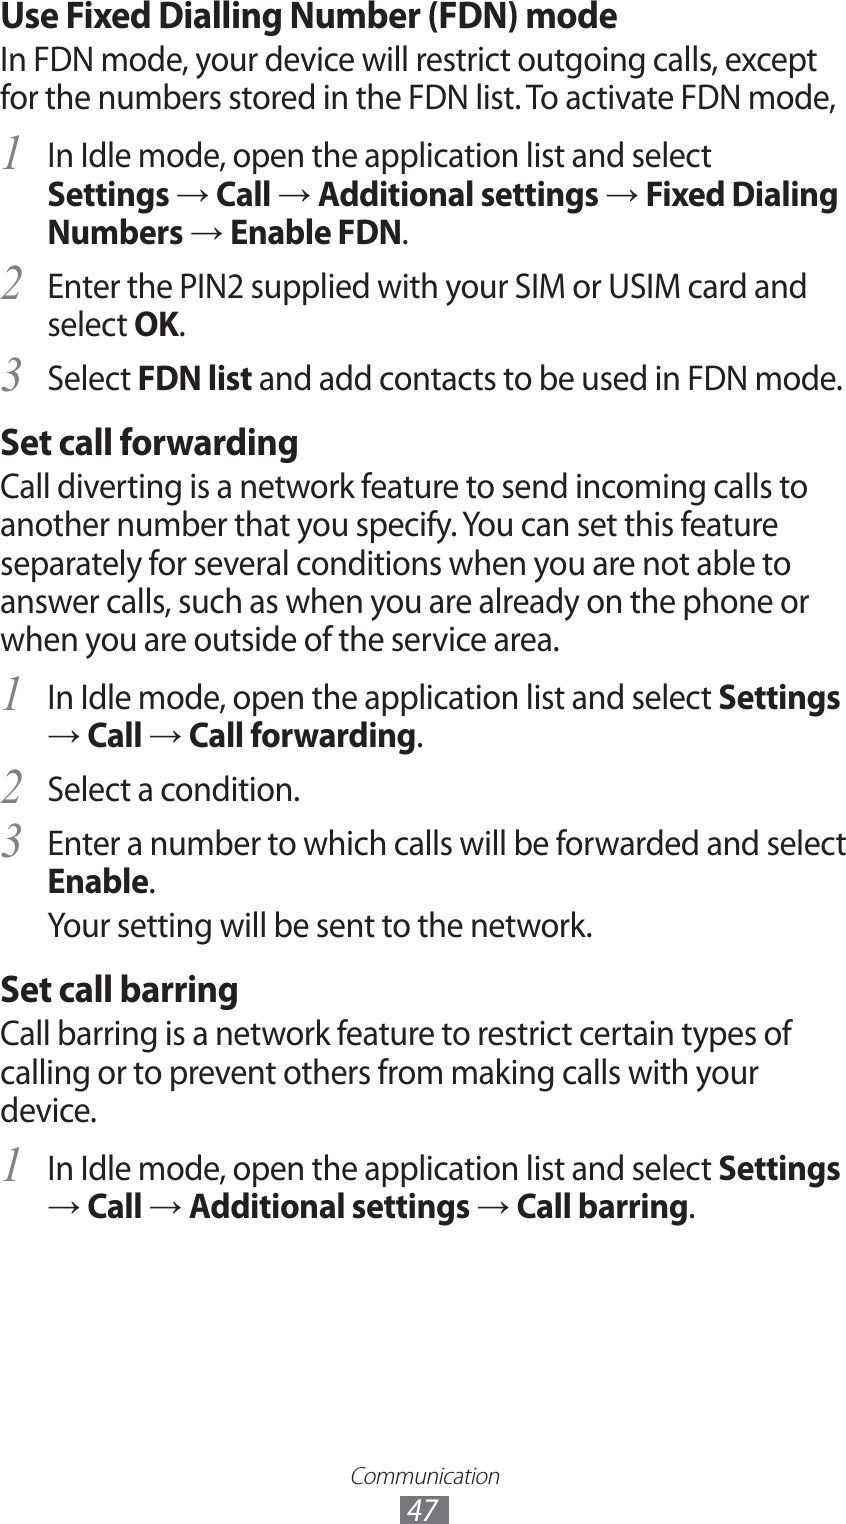 Communication47Use Fixed Dialling Number (FDN) modeIn FDN mode, your device will restrict outgoing calls, except for the numbers stored in the FDN list. To activate FDN mode,In Idle mode, open the application list and select 1 Settings → Call → Additional settings → Fixed Dialing Numbers → Enable FDN.Enter the PIN2 supplied with your SIM or USIM card and 2 select OK.Select 3 FDN list and add contacts to be used in FDN mode.Set call forwardingCall diverting is a network feature to send incoming calls to another number that you specify. You can set this feature separately for several conditions when you are not able to answer calls, such as when you are already on the phone or when you are outside of the service area.In Idle mode, open the application list and select 1 Settings → Call → Call forwarding.Select a condition.2 Enter a number to which calls will be forwarded and select 3 Enable.Your setting will be sent to the network.Set call barringCall barring is a network feature to restrict certain types of calling or to prevent others from making calls with your device.In Idle mode, open the application list and select 1 Settings → Call → Additional settings → Call barring.